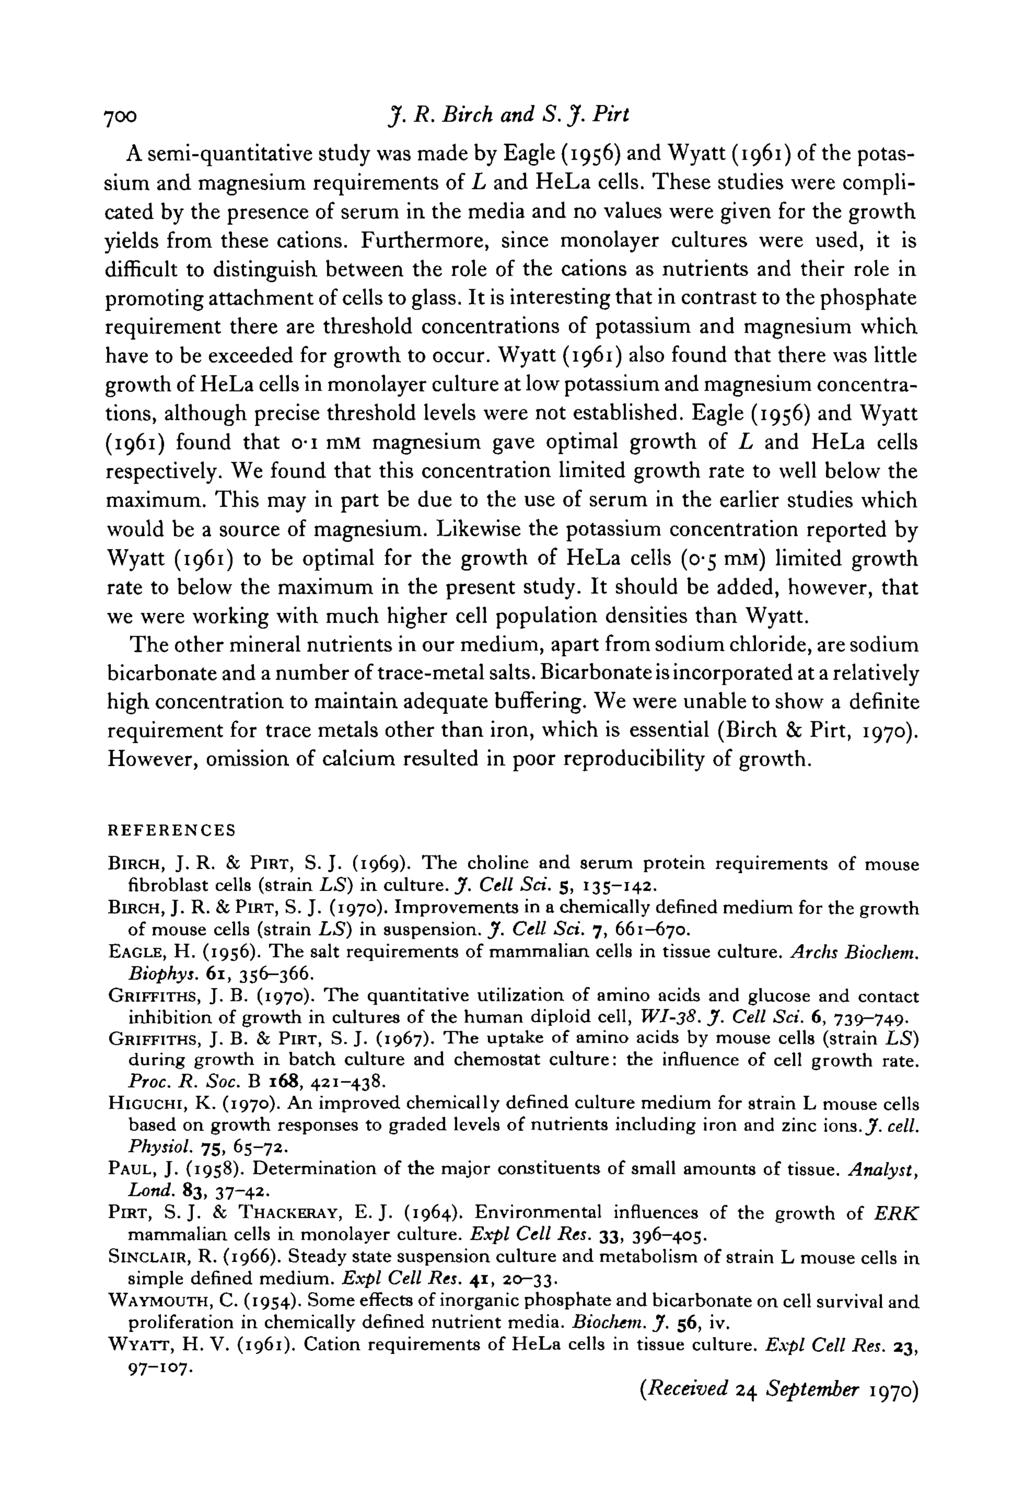 700 J. R. Birch and S. J. Pirt A semi-quantitative study was made by Eagle (1956) and Wyatt (1961) of the potassium and magnesium requirements of L and HeLa cells.